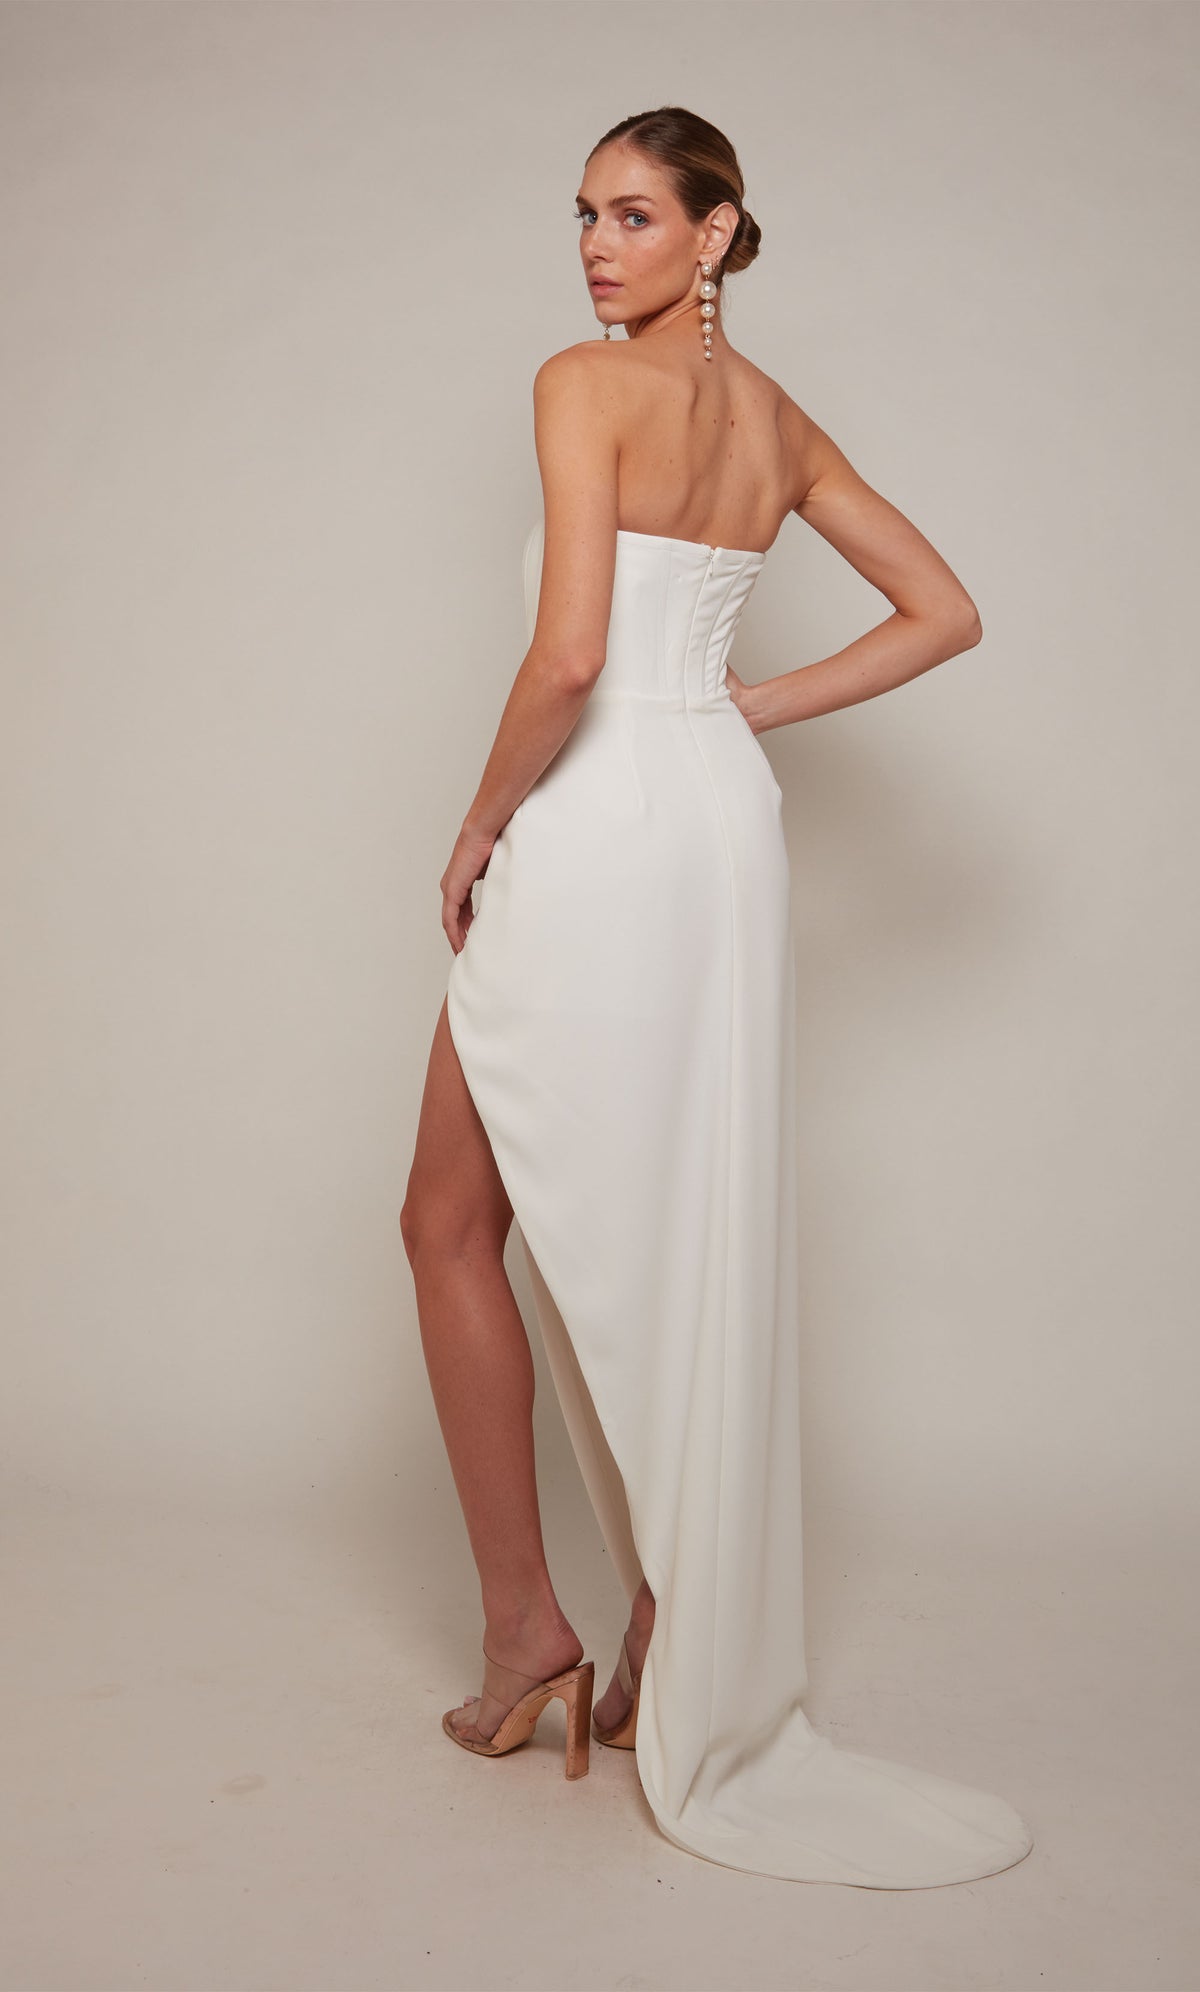 A modern corset wedding dress with a high-low hemline, zip-up back, and slight train in ivory